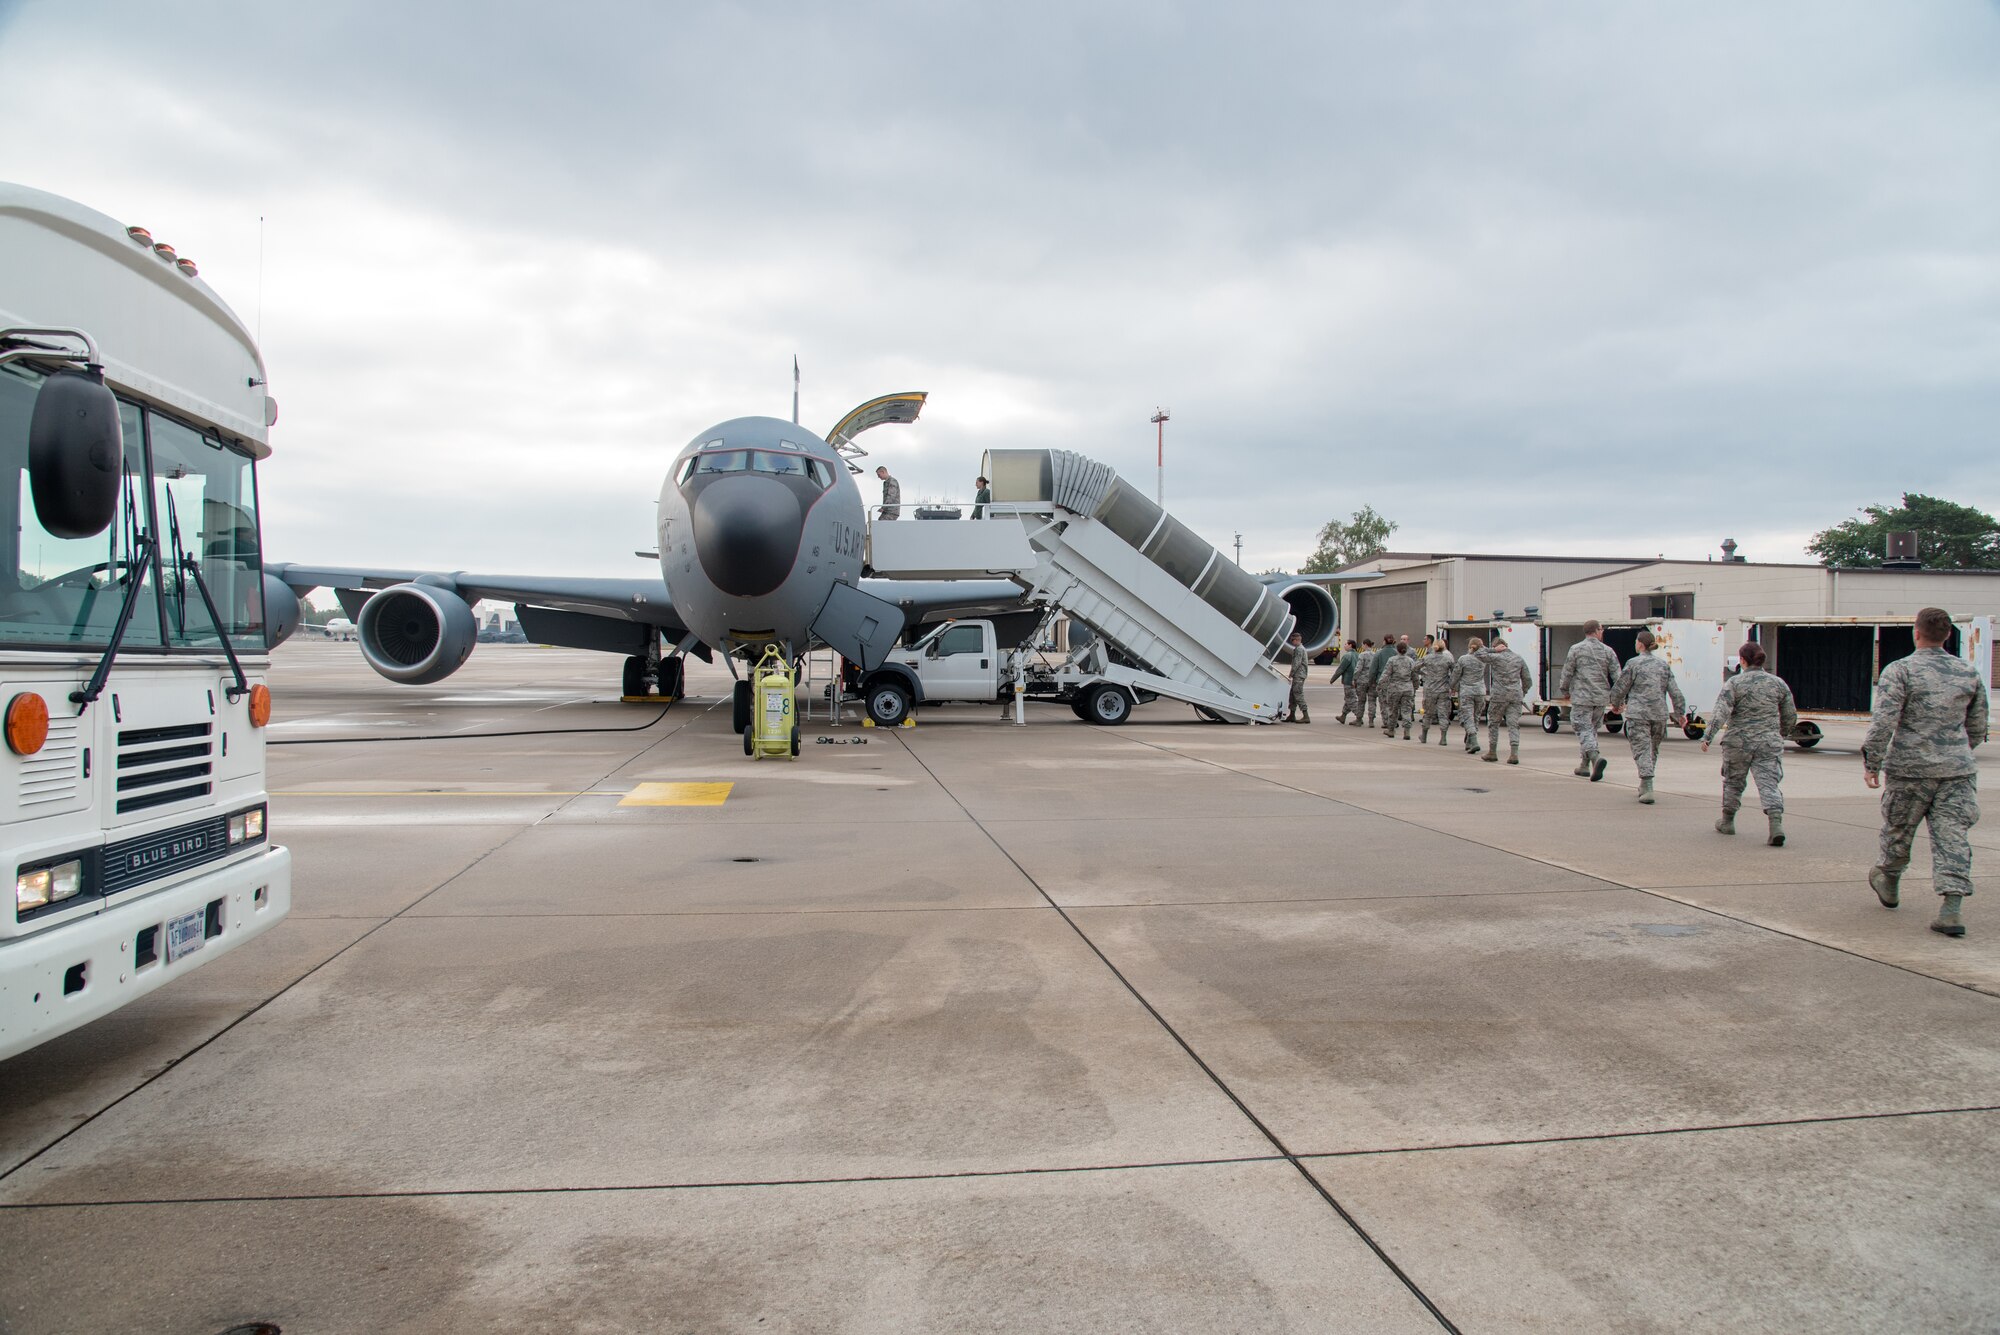 A KC-135 Stratotanker, assigned to the 128th Air Refuleing Wing, General Mitchell Air National Guard Base, Wisconsin, sits on the tarmack at Ramstein Air Base, Germany, Aug. 30, 2018. The 128th ARW transported 115th Force Support Squadron Airmen, who are TDY, from Truax Field, Wisconsin, to Ramstein Air Base Germany. (U.S. Air National Guard photo by Airman 1st Class Cameron Lewis)